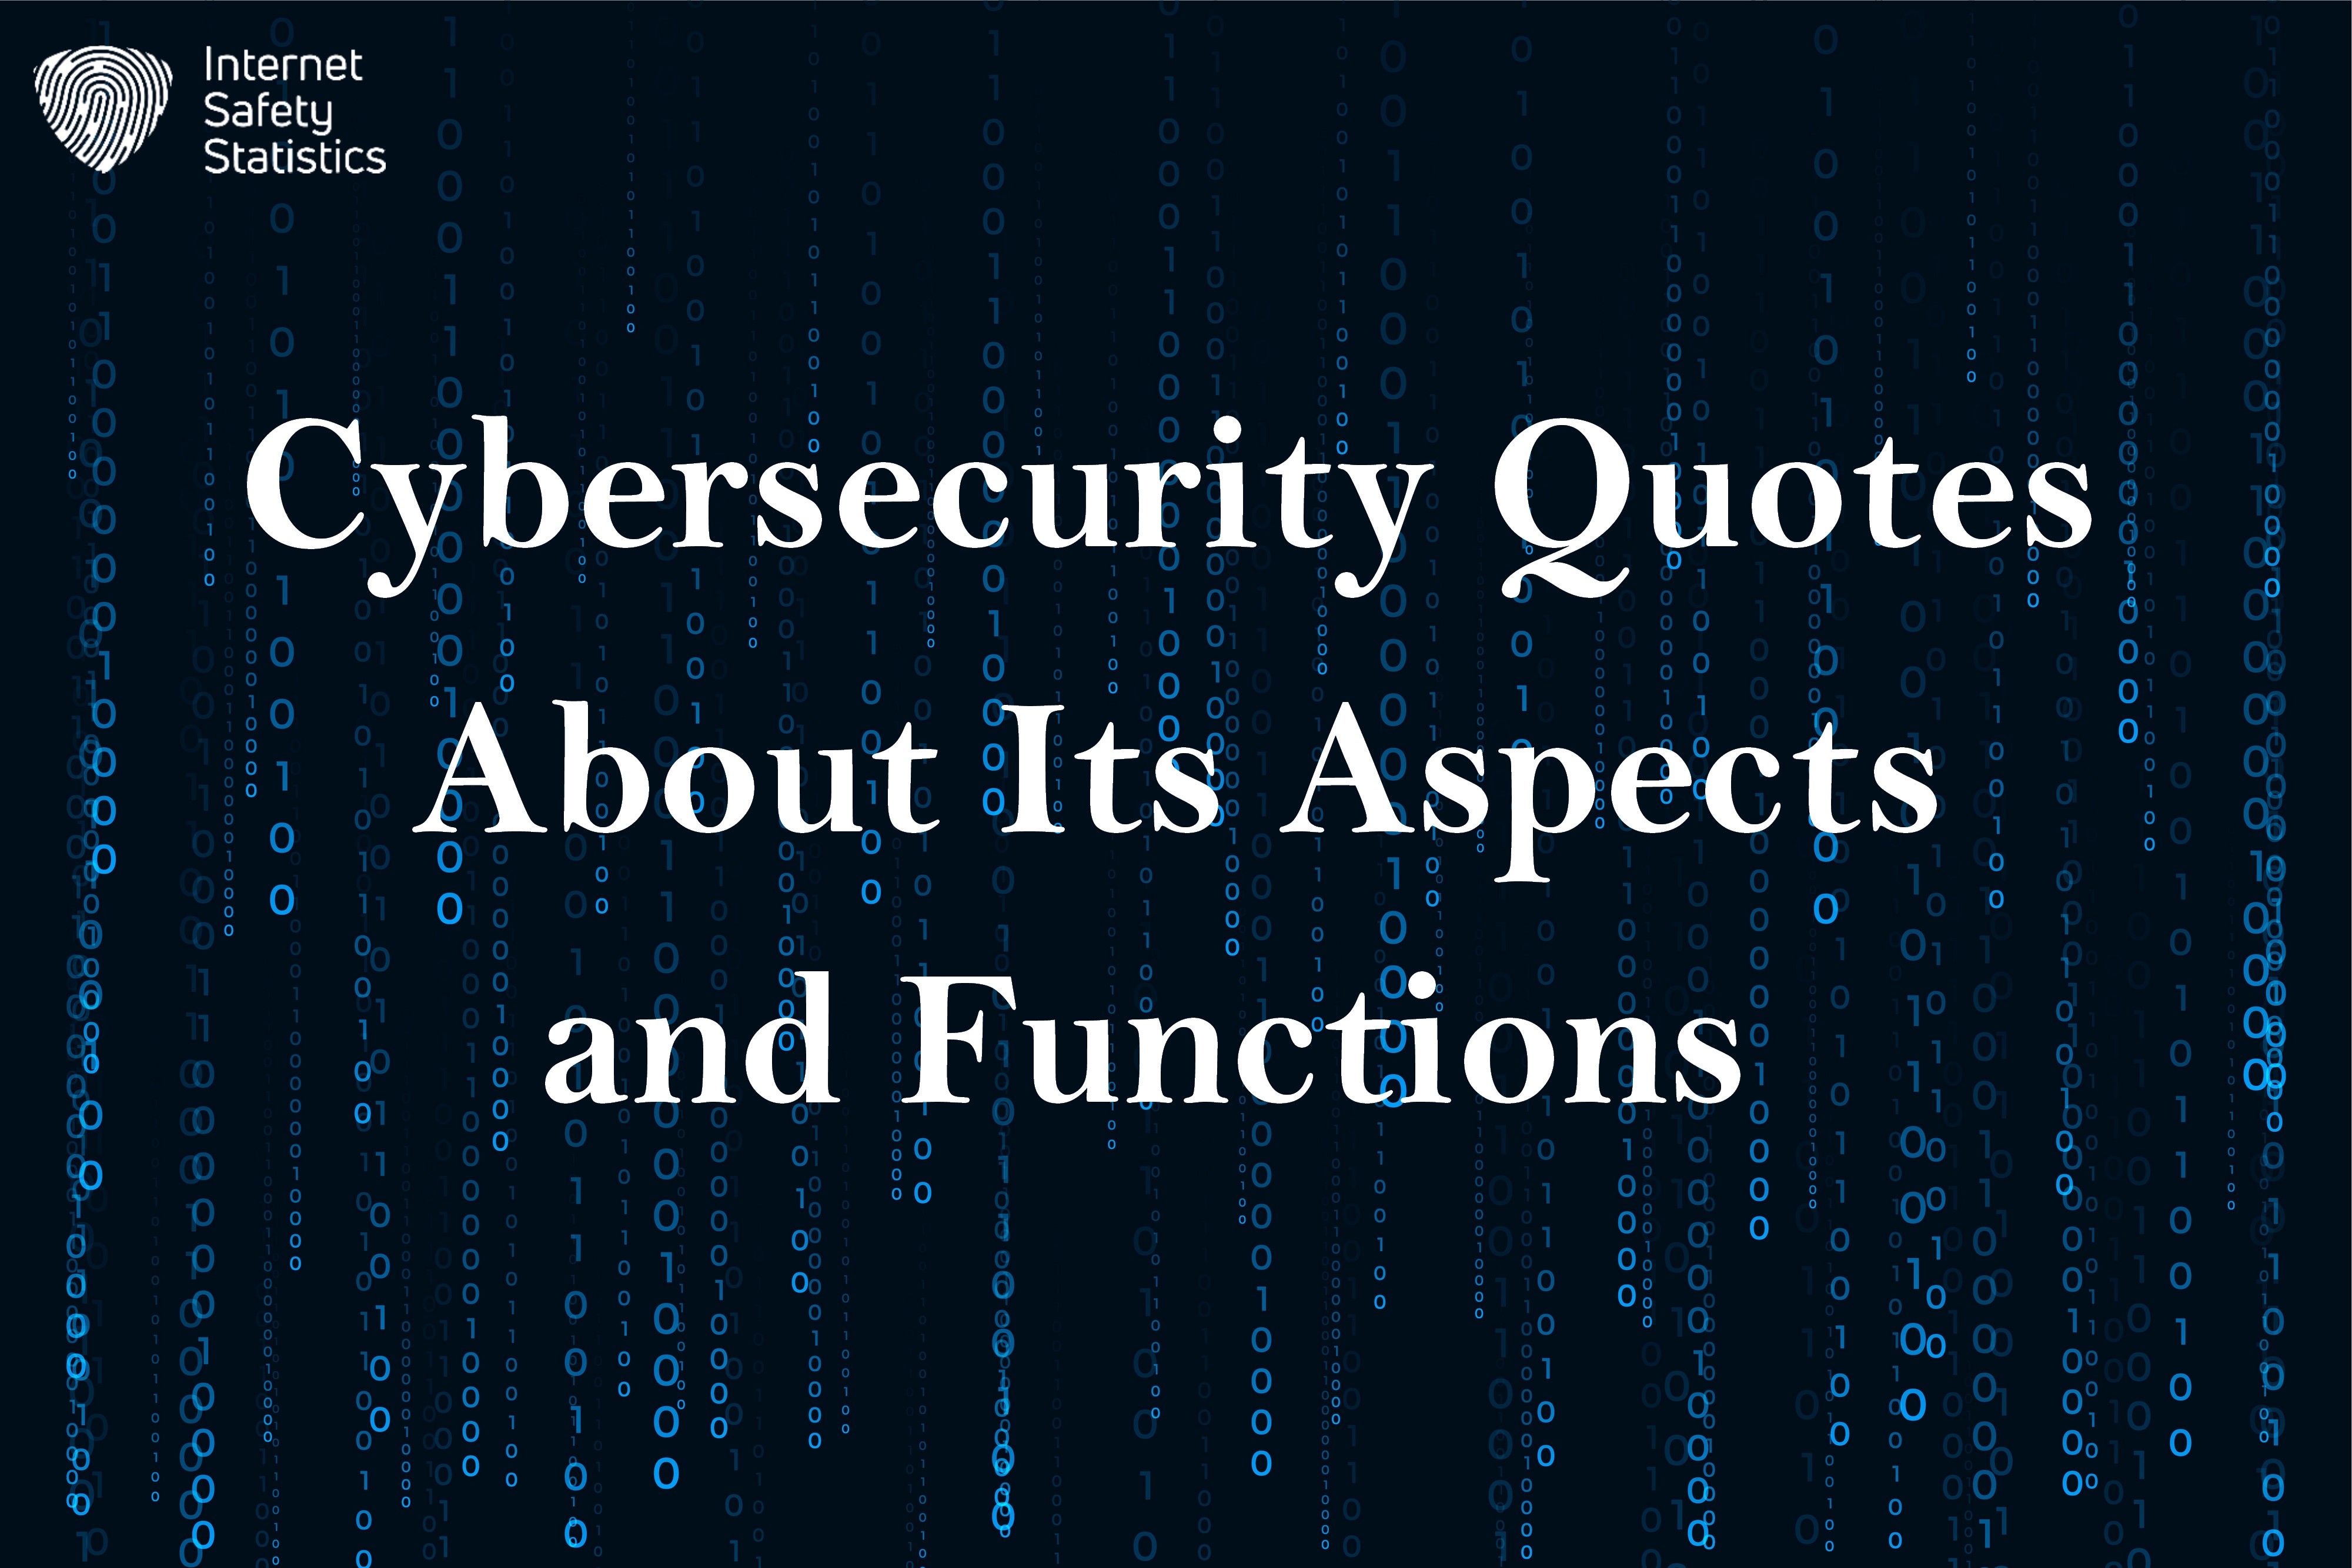 Cybersecurity Quotes About Its Aspects and Functions